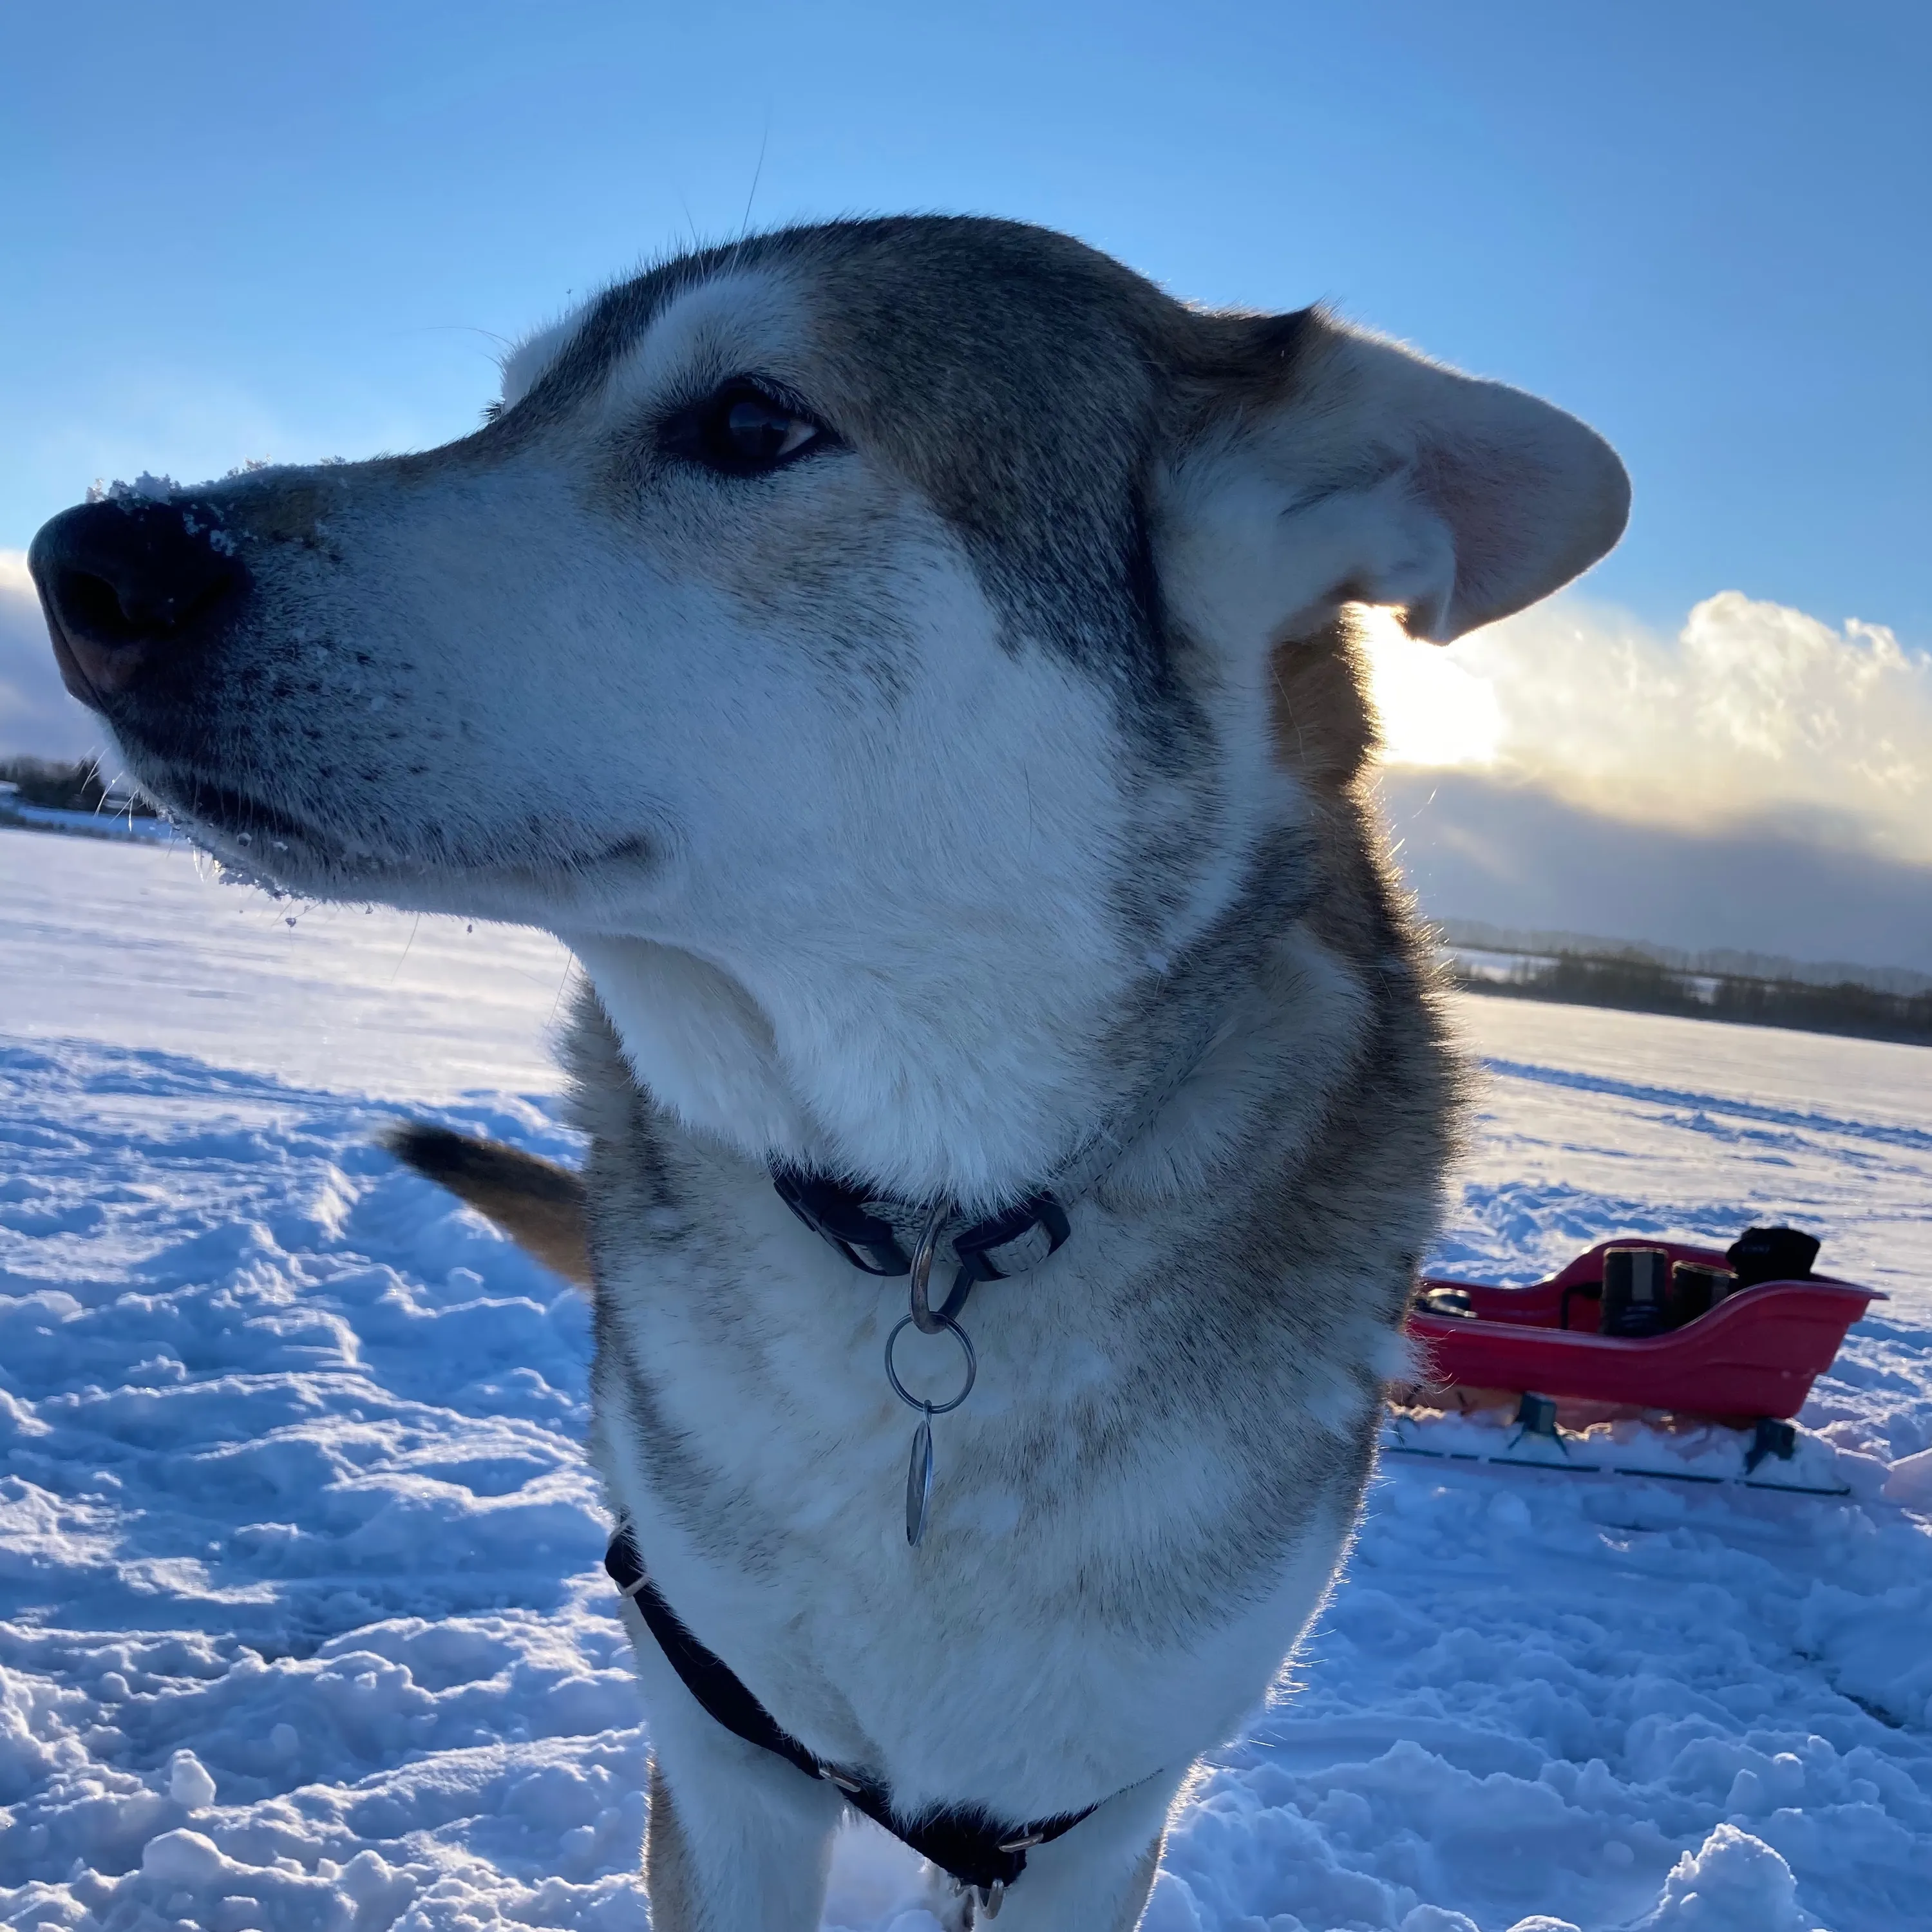 A husky dog on a frozen lake in the winter